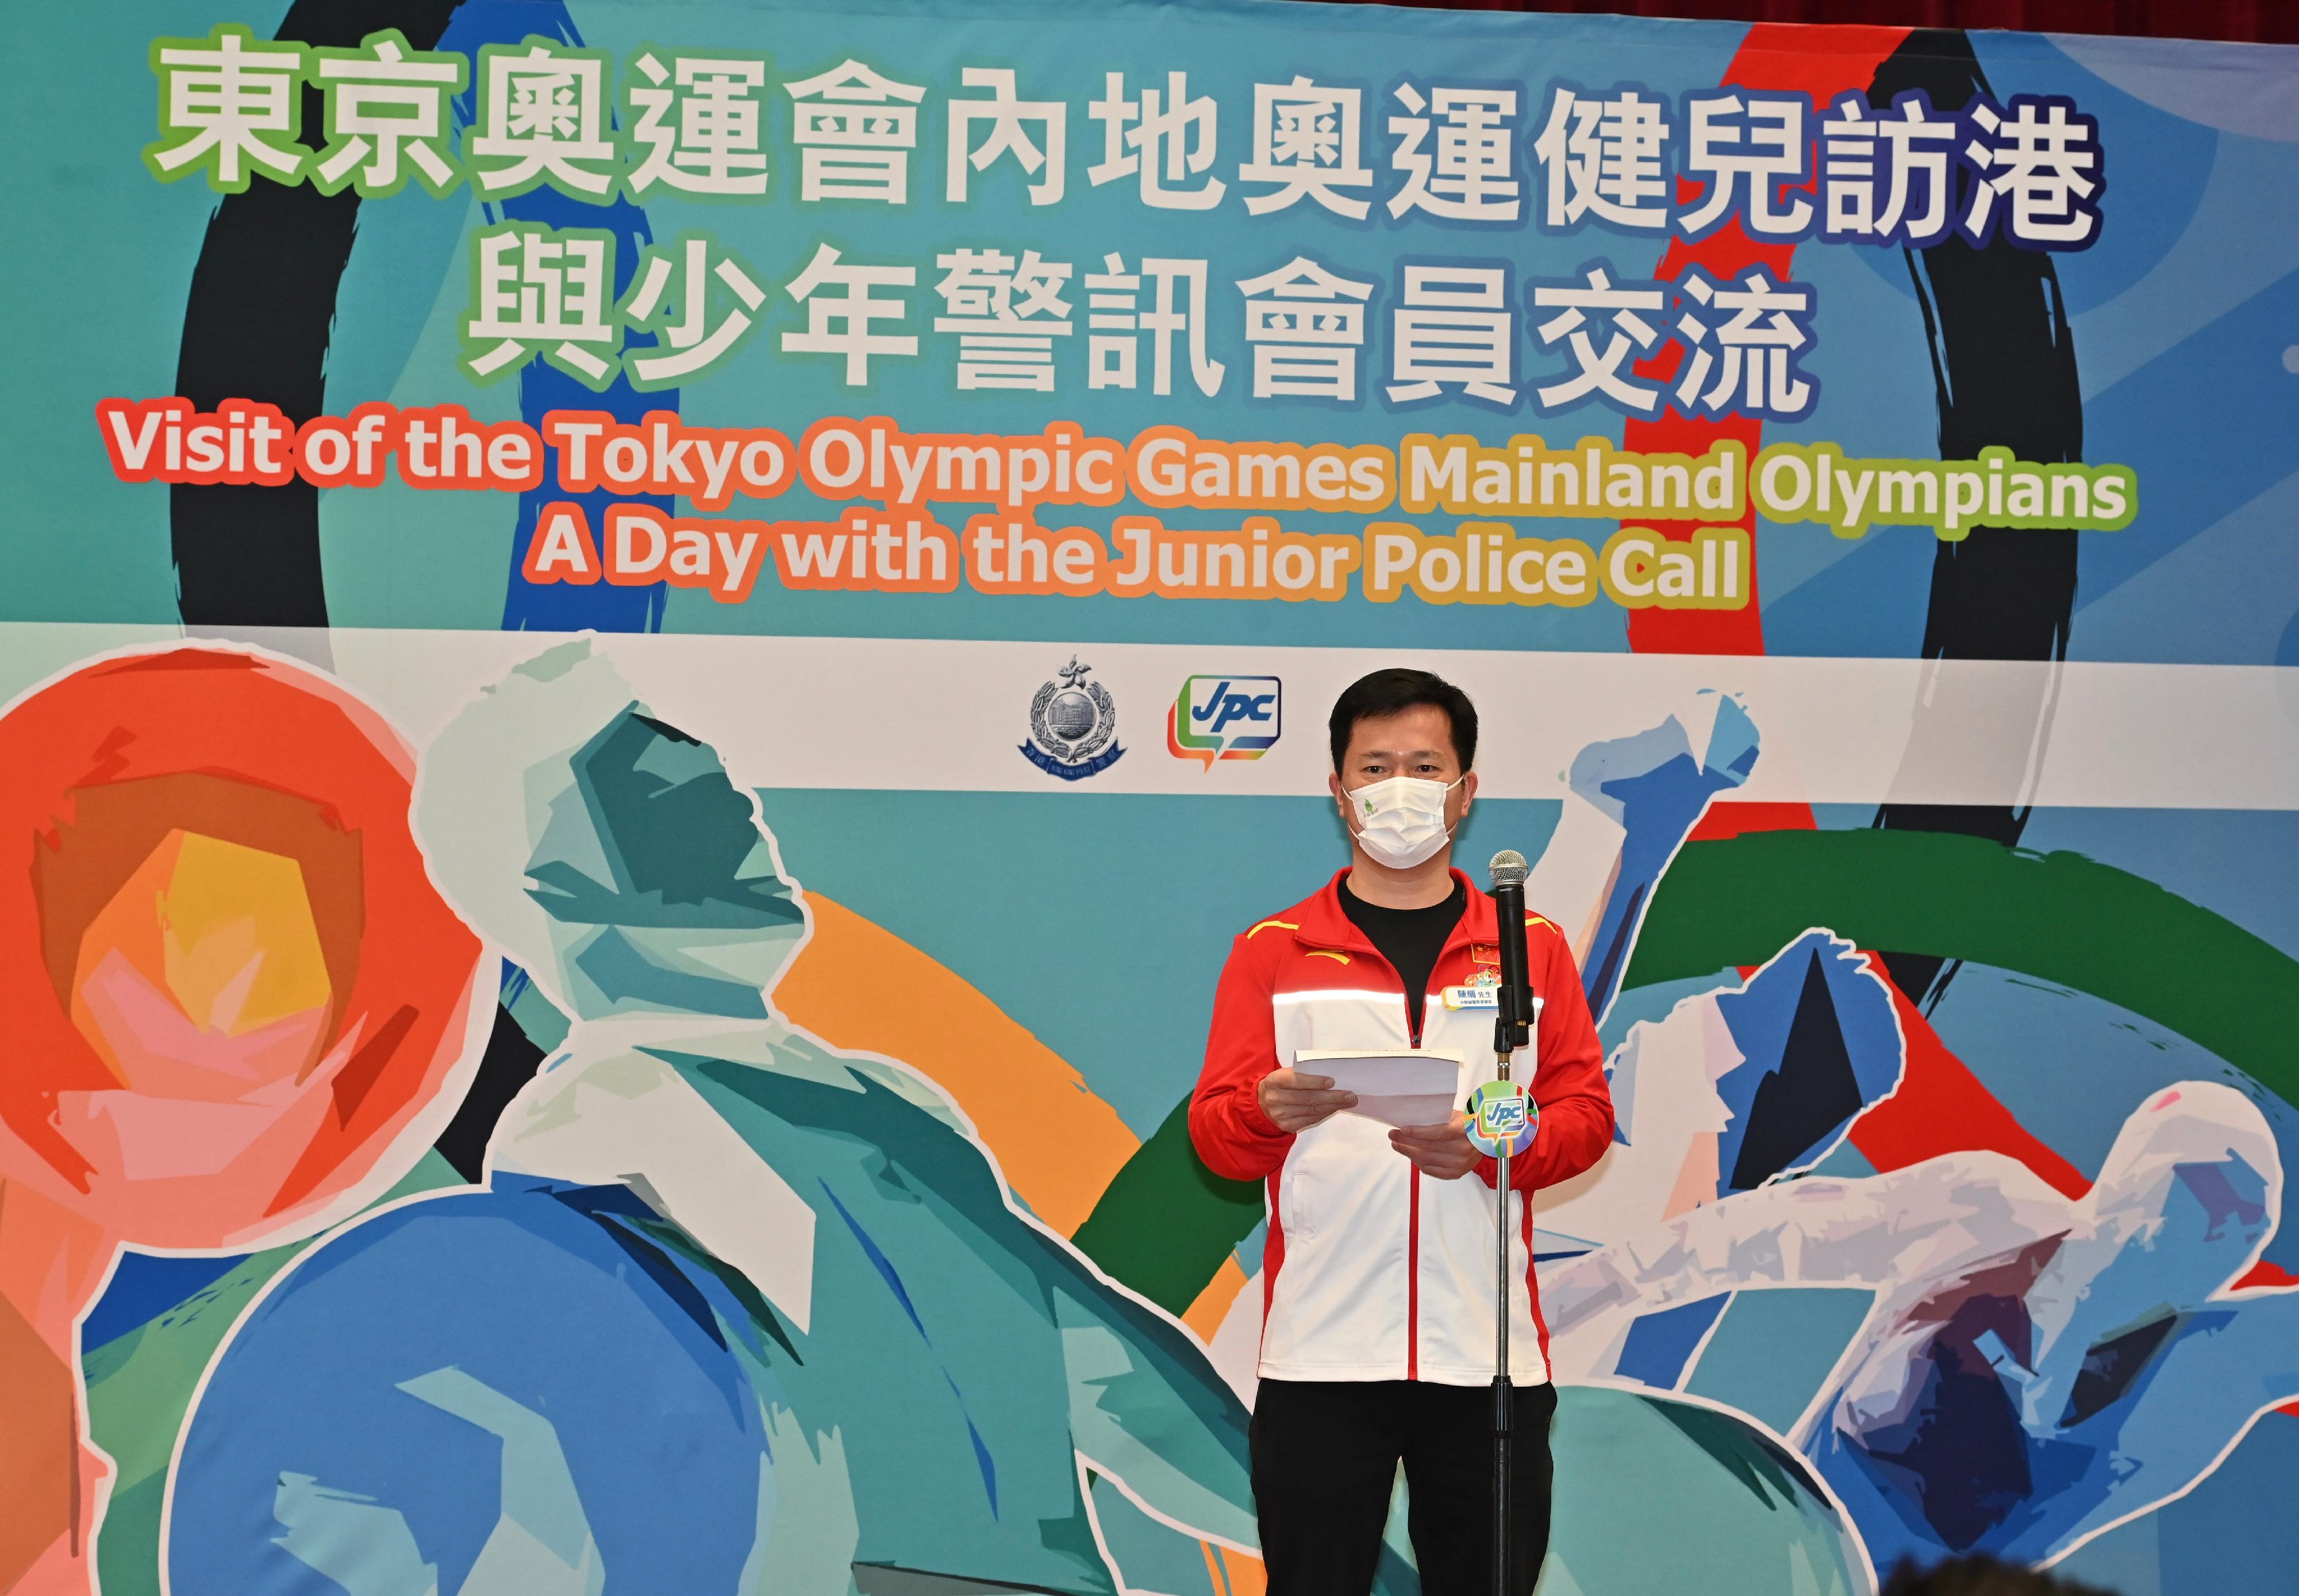 Four athlete representatives from the delegation of Tokyo 2020 Olympic Games Mainland Olympians, who arrived in Hong Kong on December 3 for a three-day visit, met with members of Junior Police Call at the Hong Kong Police College this morning (December 5). Photo shows the Director-General of the Police Liaison Department of the Liaison Office of the Central People's Government in the Hong Kong Special Administrative Region, Mr Chen Feng, delivering a speech.